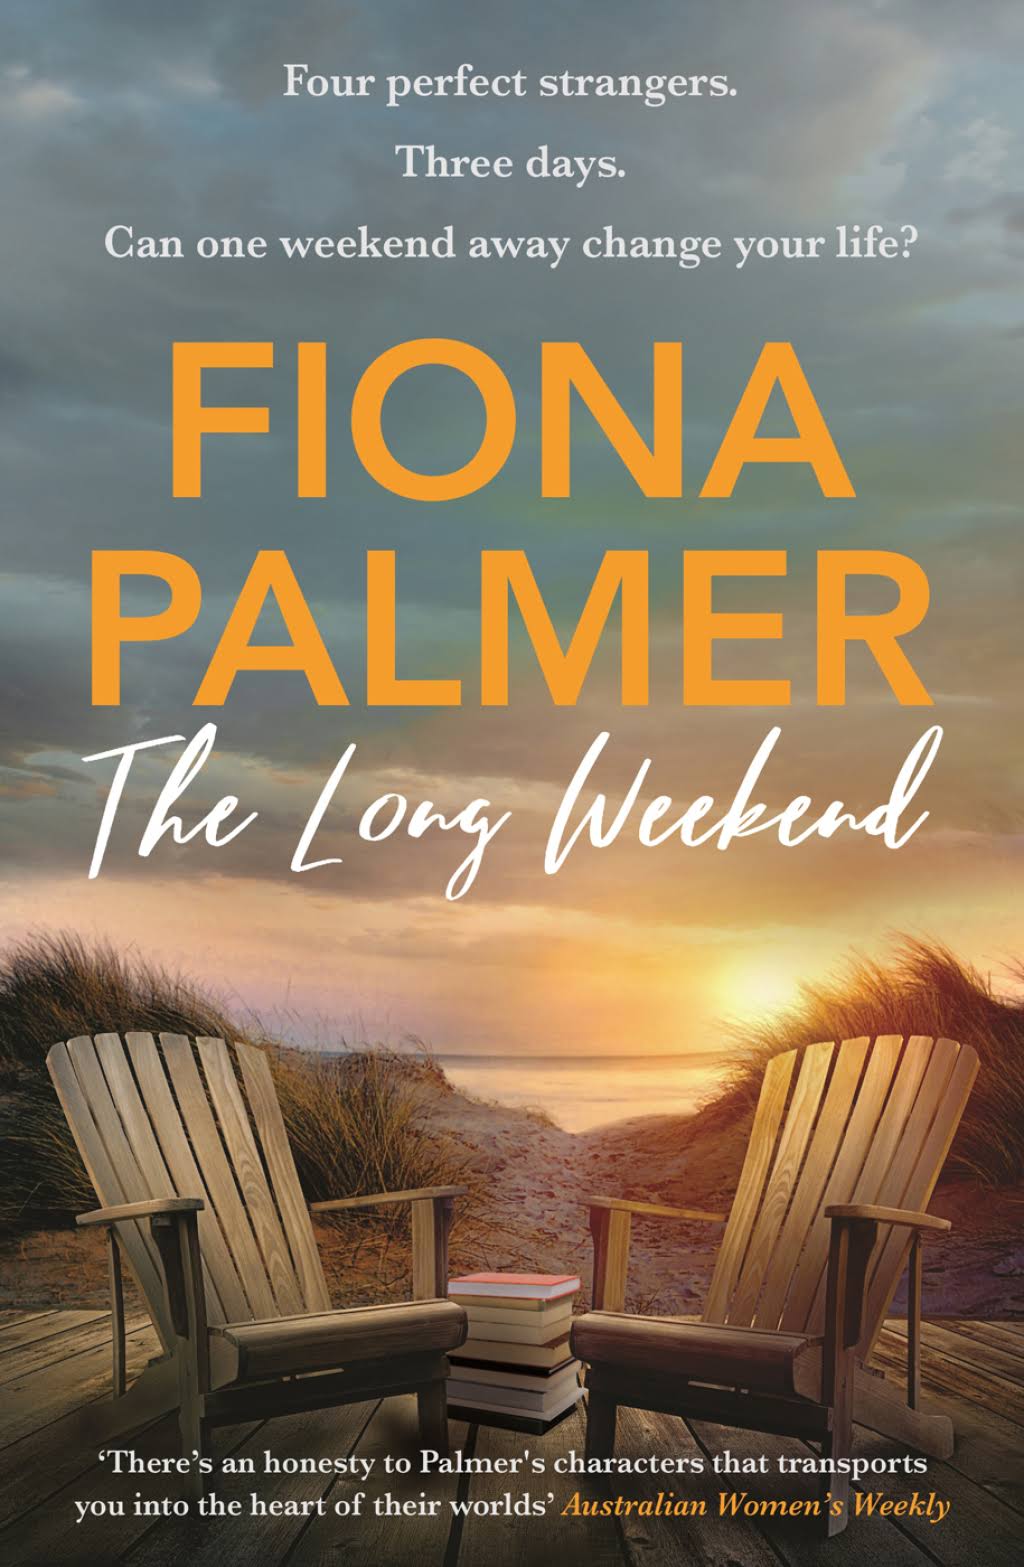 The Long Weekend [Book]